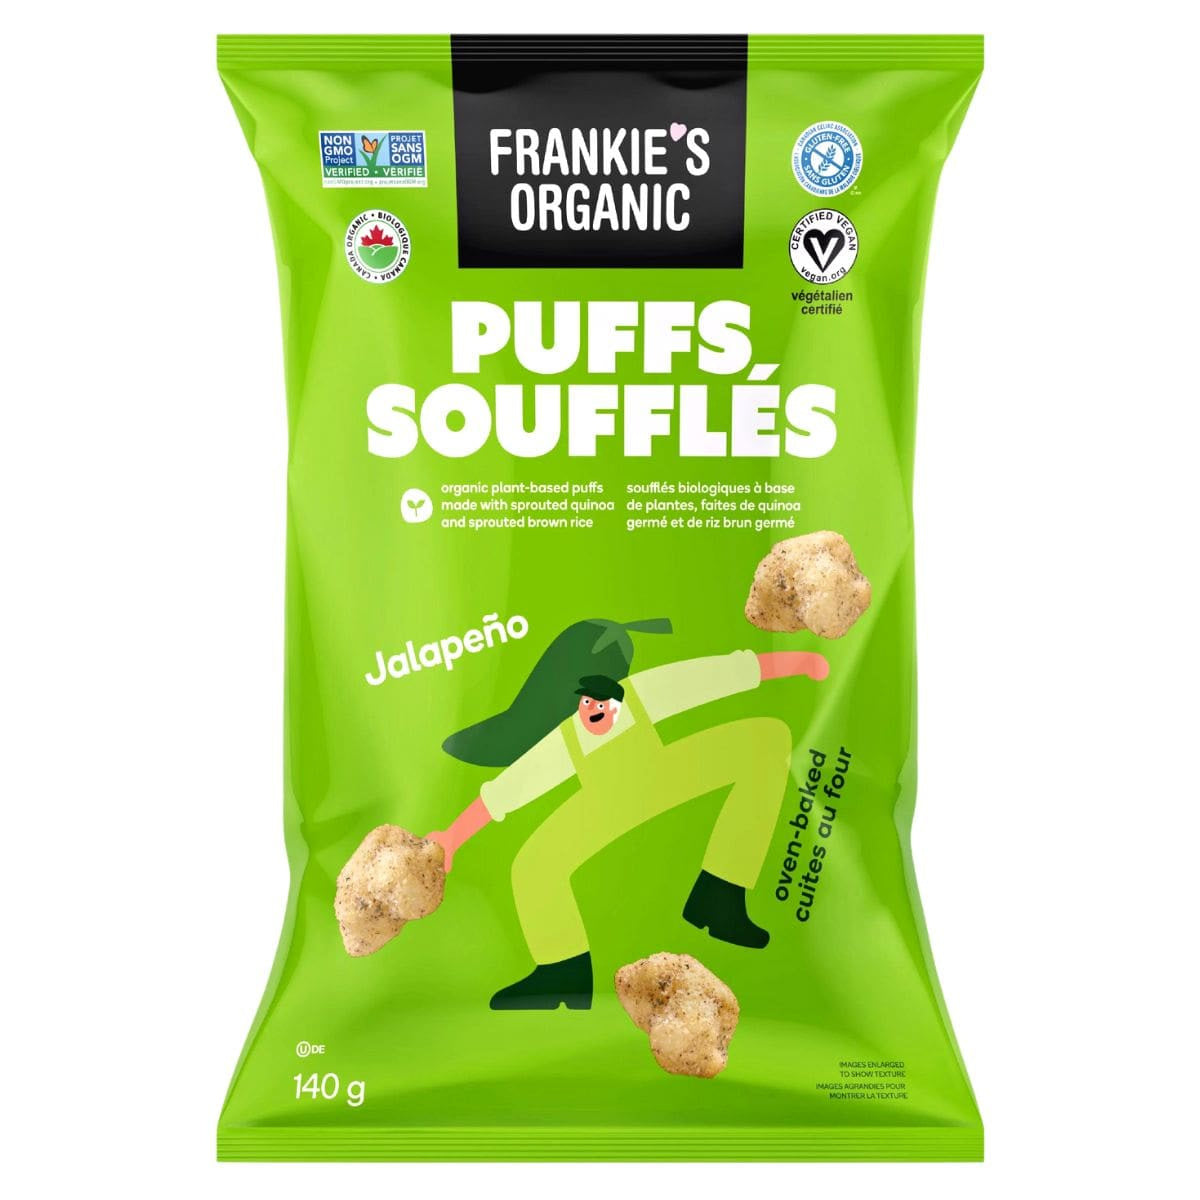 Lime green package of Frankie's Organic Jalapeno Puffs.